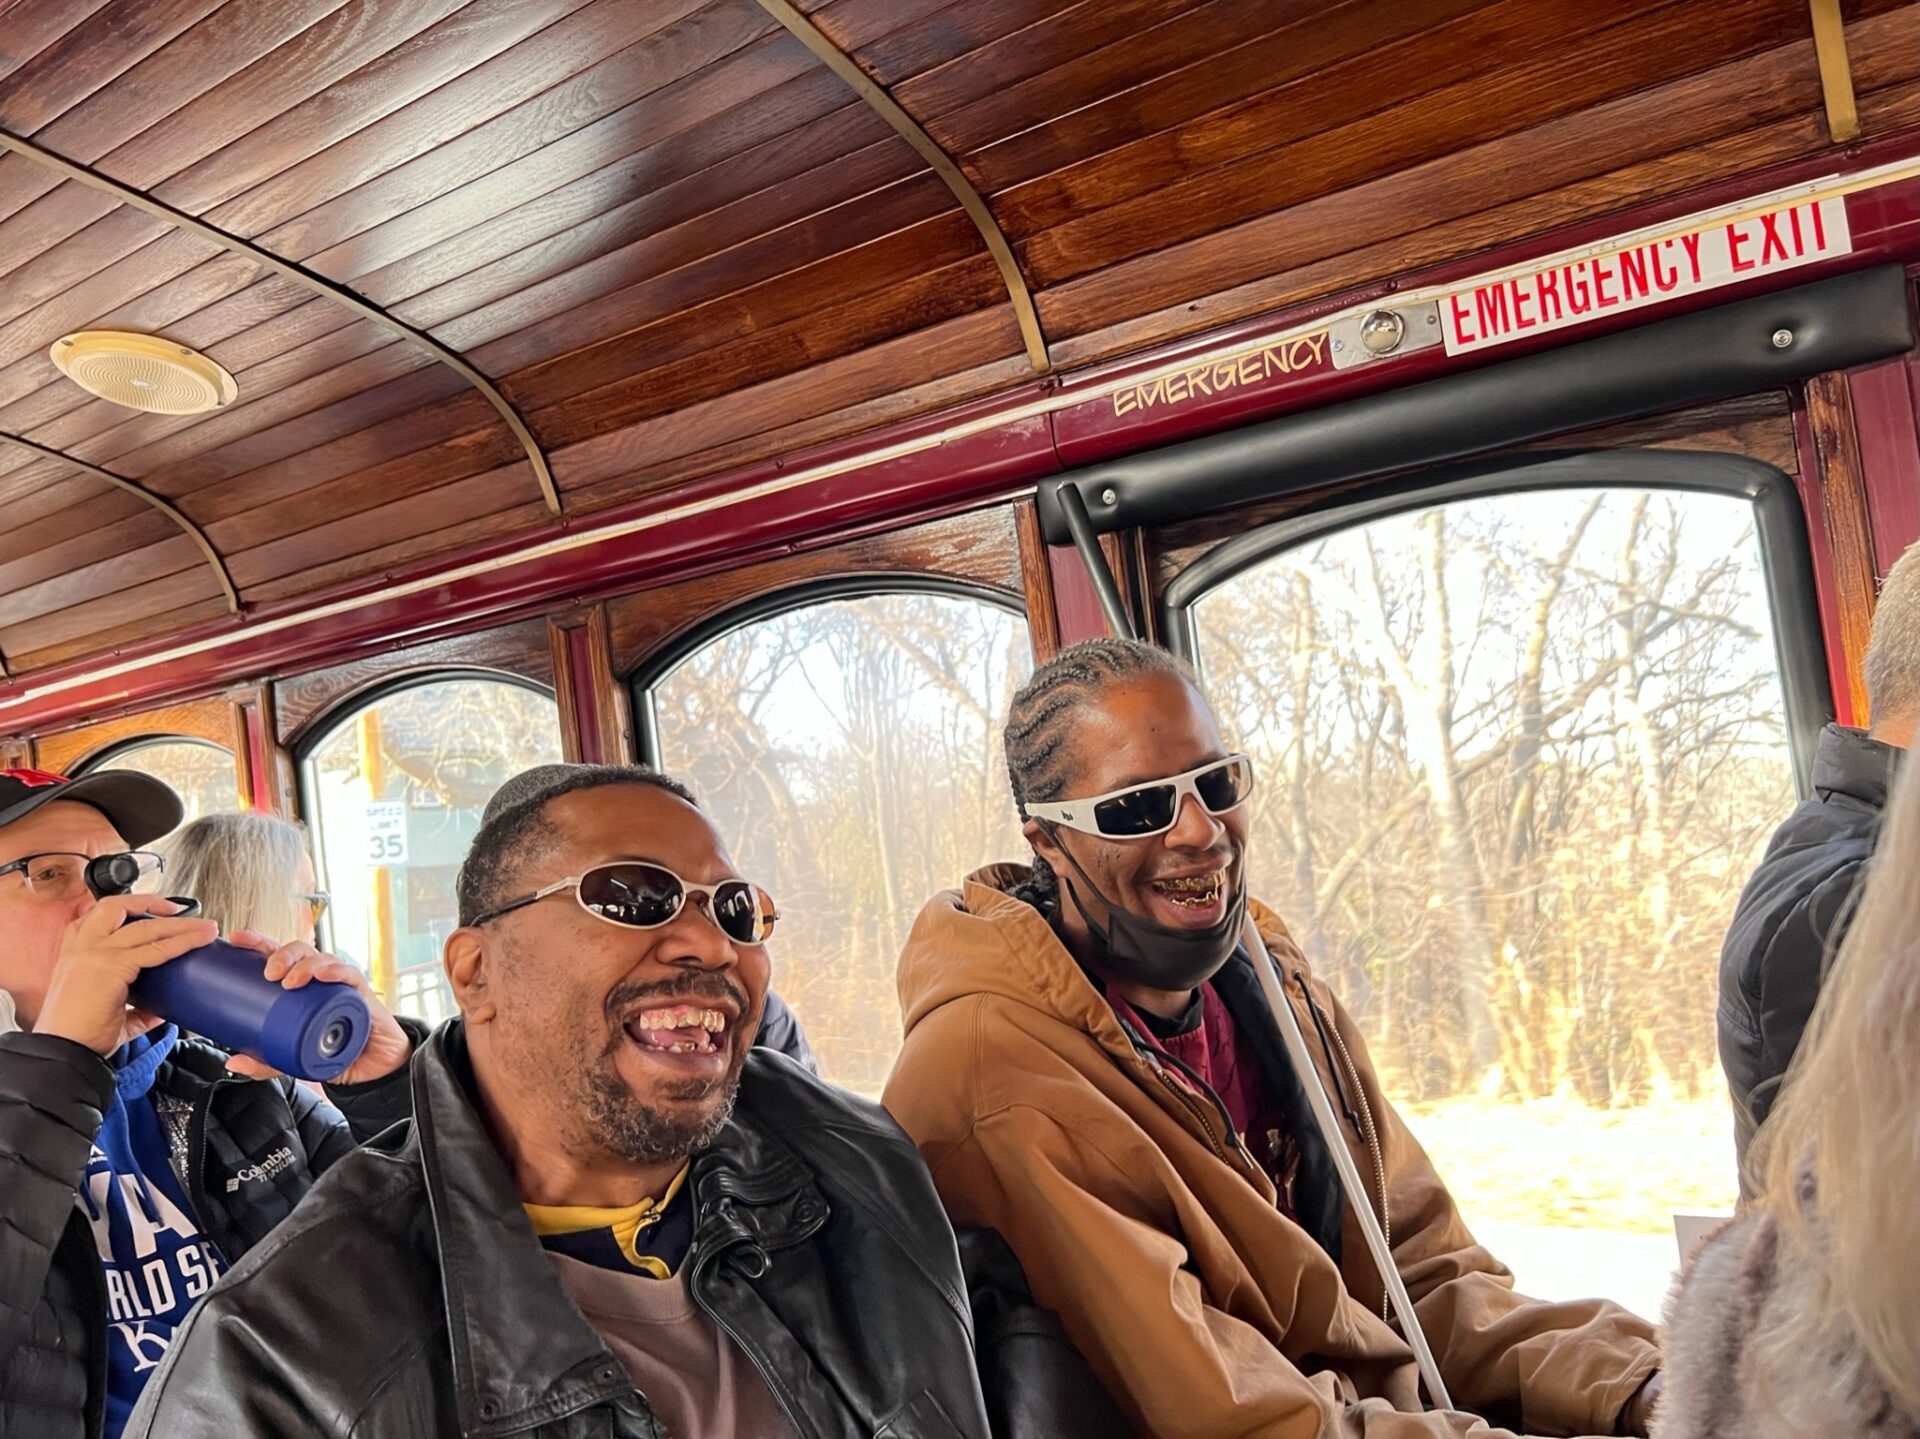 Two black men with sunglasses on sitting side by side on a bench inside Ollie the Trolley. The trolley windows and ceiling are showing in the background.